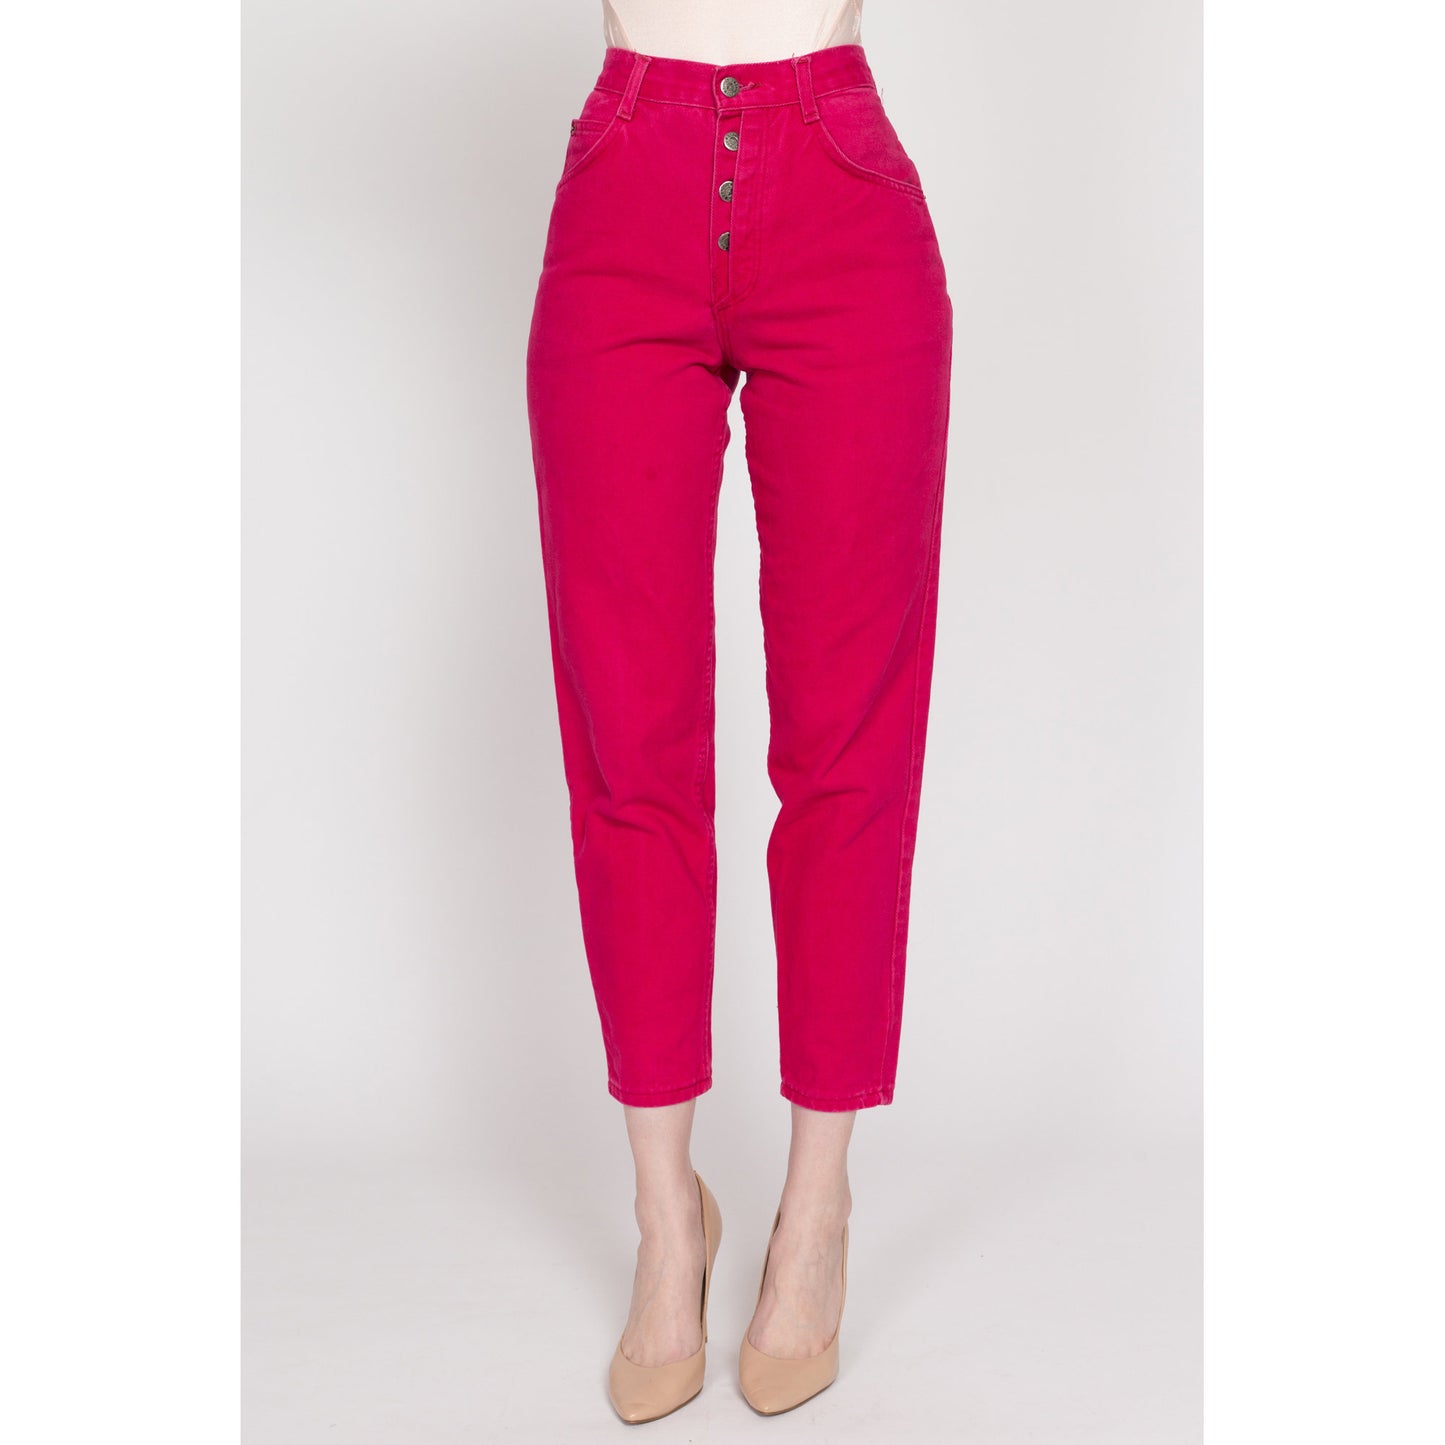 XS 90s Hot Pink Exposed Button Fly Jeans 23.5" | Vintage High Waisted Denim Tapered Leg Mom Jeans